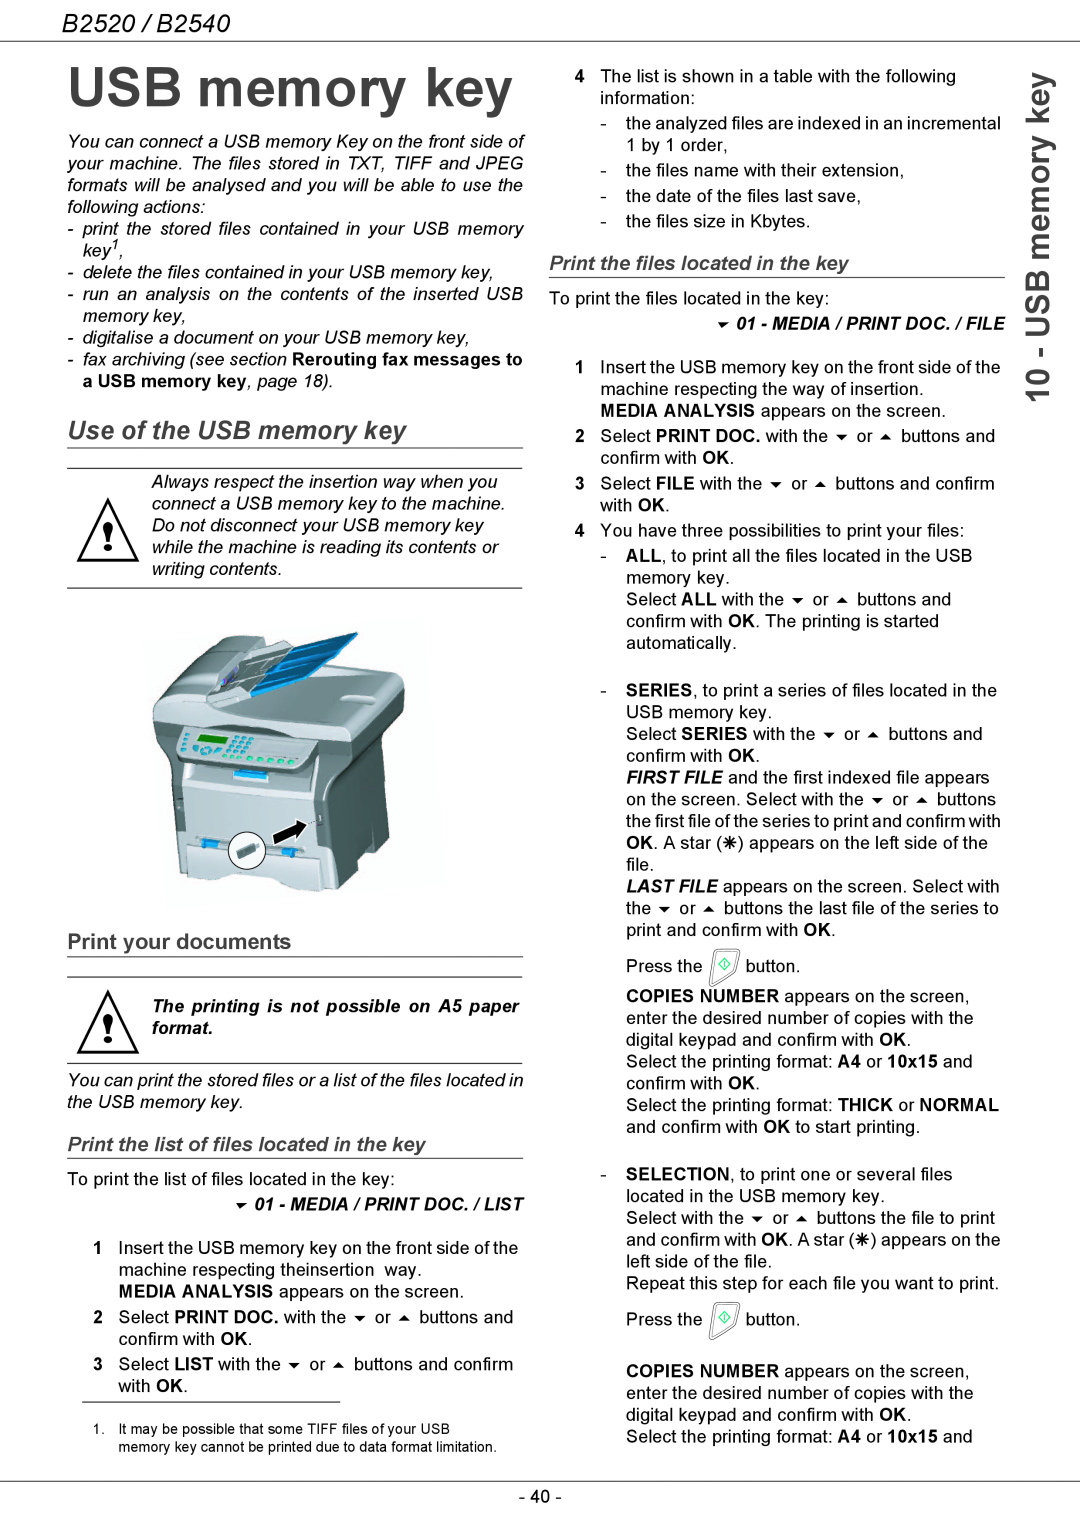 Oki B2500 Series manual Use of the USB memory key, Print your documents, Print the list of files located in the key 